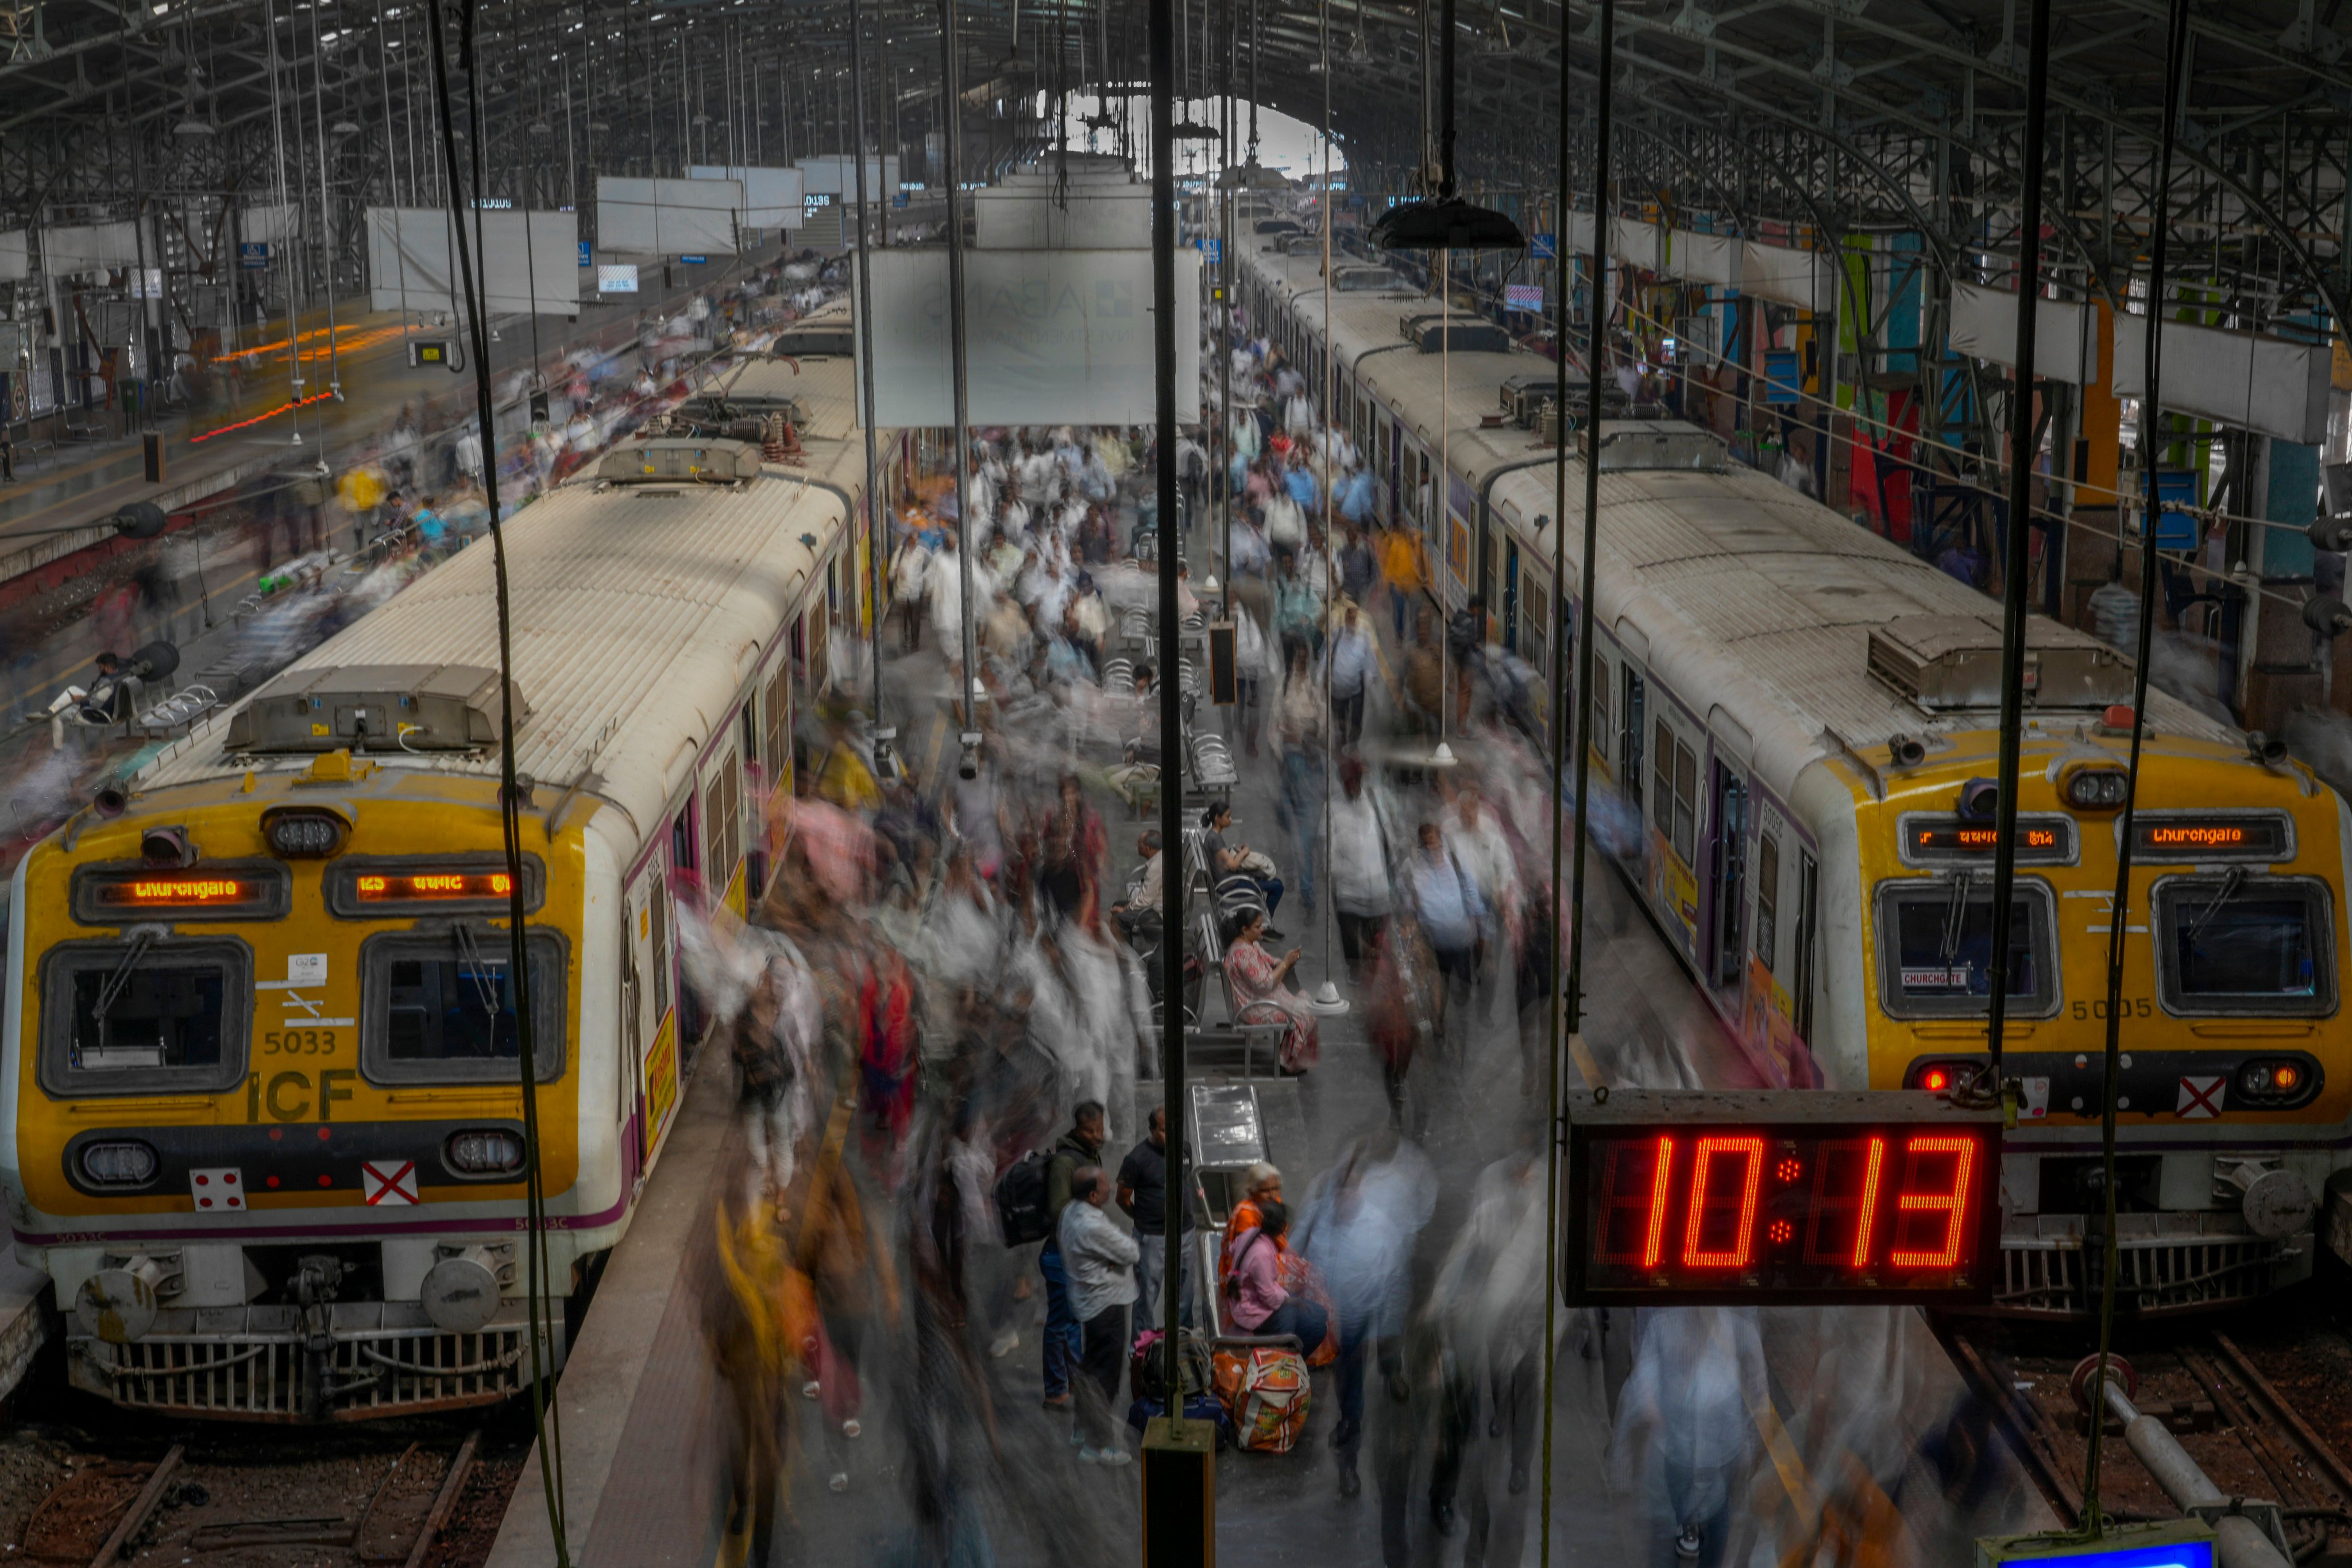 Indian commuters get off trains at the Church Gate railway station in Mumbai, India. The country saw a record 411 million passengers in the first three weeks in April. Photo: AP